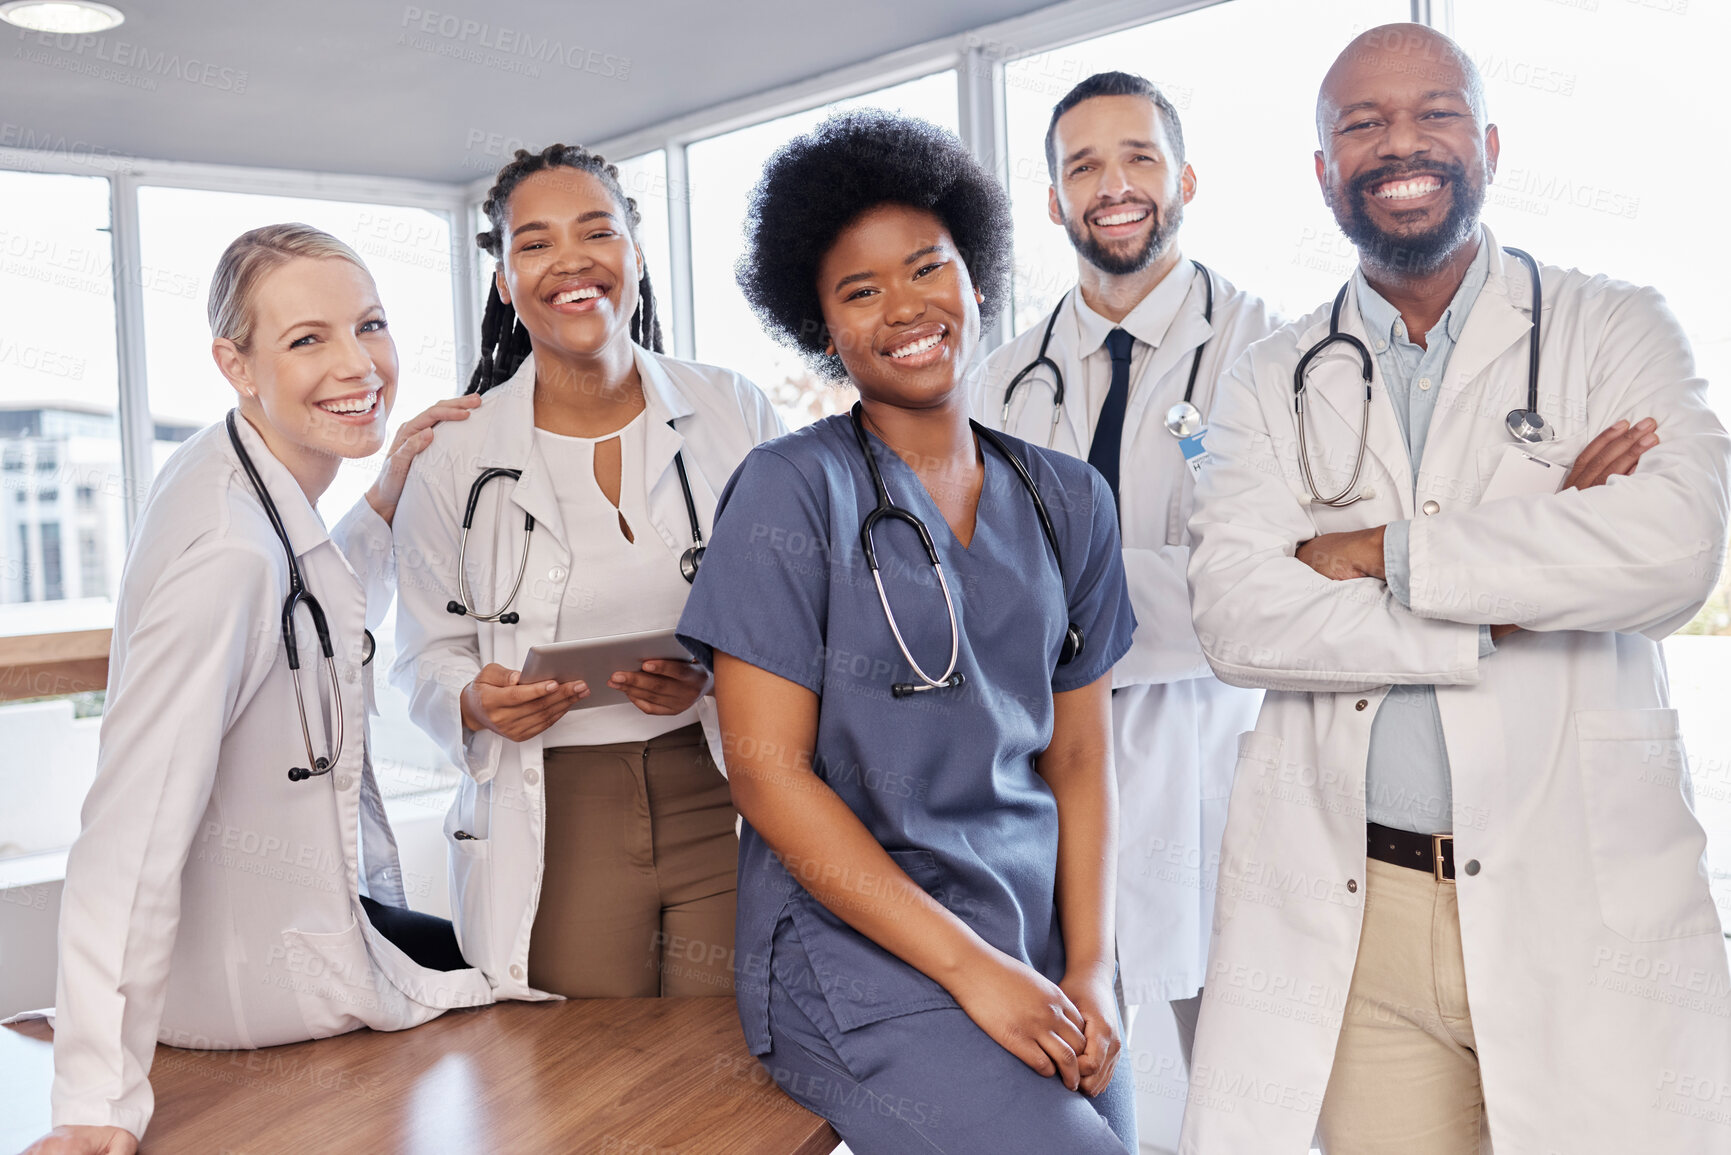 Buy stock photo Smile, portrait and hospital doctors, people or surgeon team for healthcare, help services or medical collaboration. Medicine health professional, clinic group solidarity or staff nurses for medicare